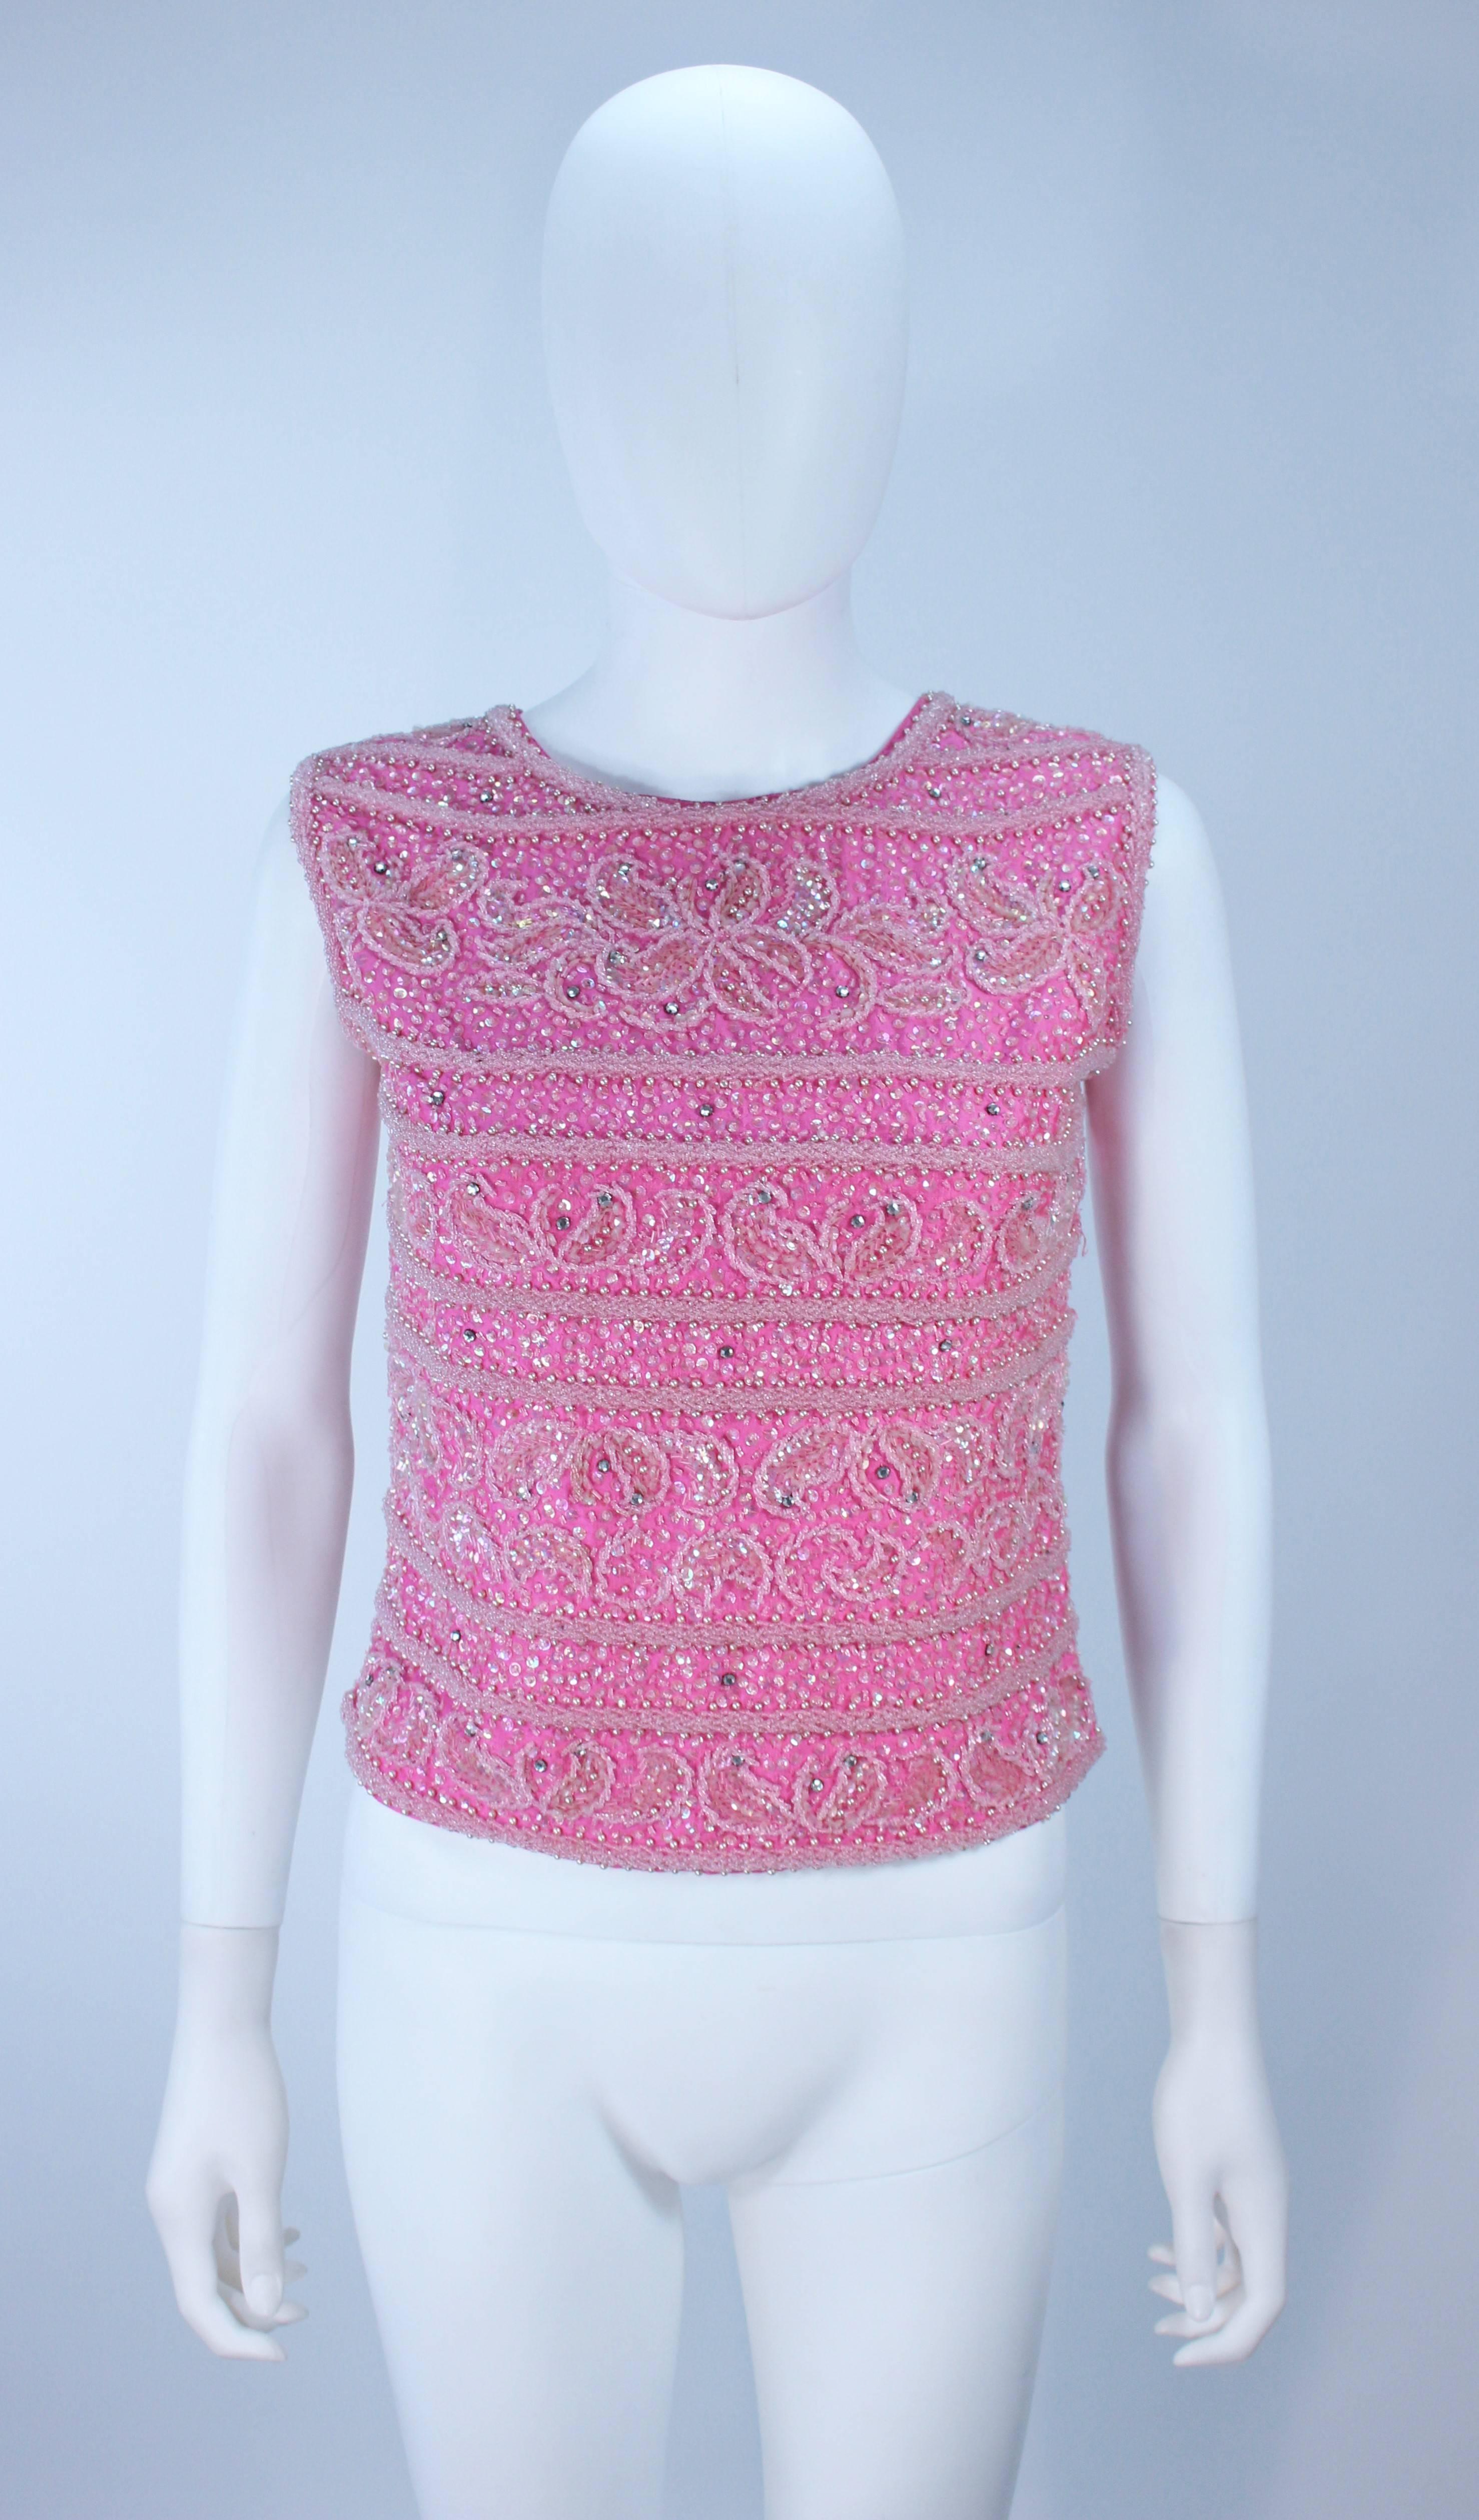  This blouse is composed of a pink heavily embellished fabric with a floral pattern. There is a center back zipper closure. In excellent vintage condition.

  **Please cross-reference measurements for personal accuracy. Size in description box is